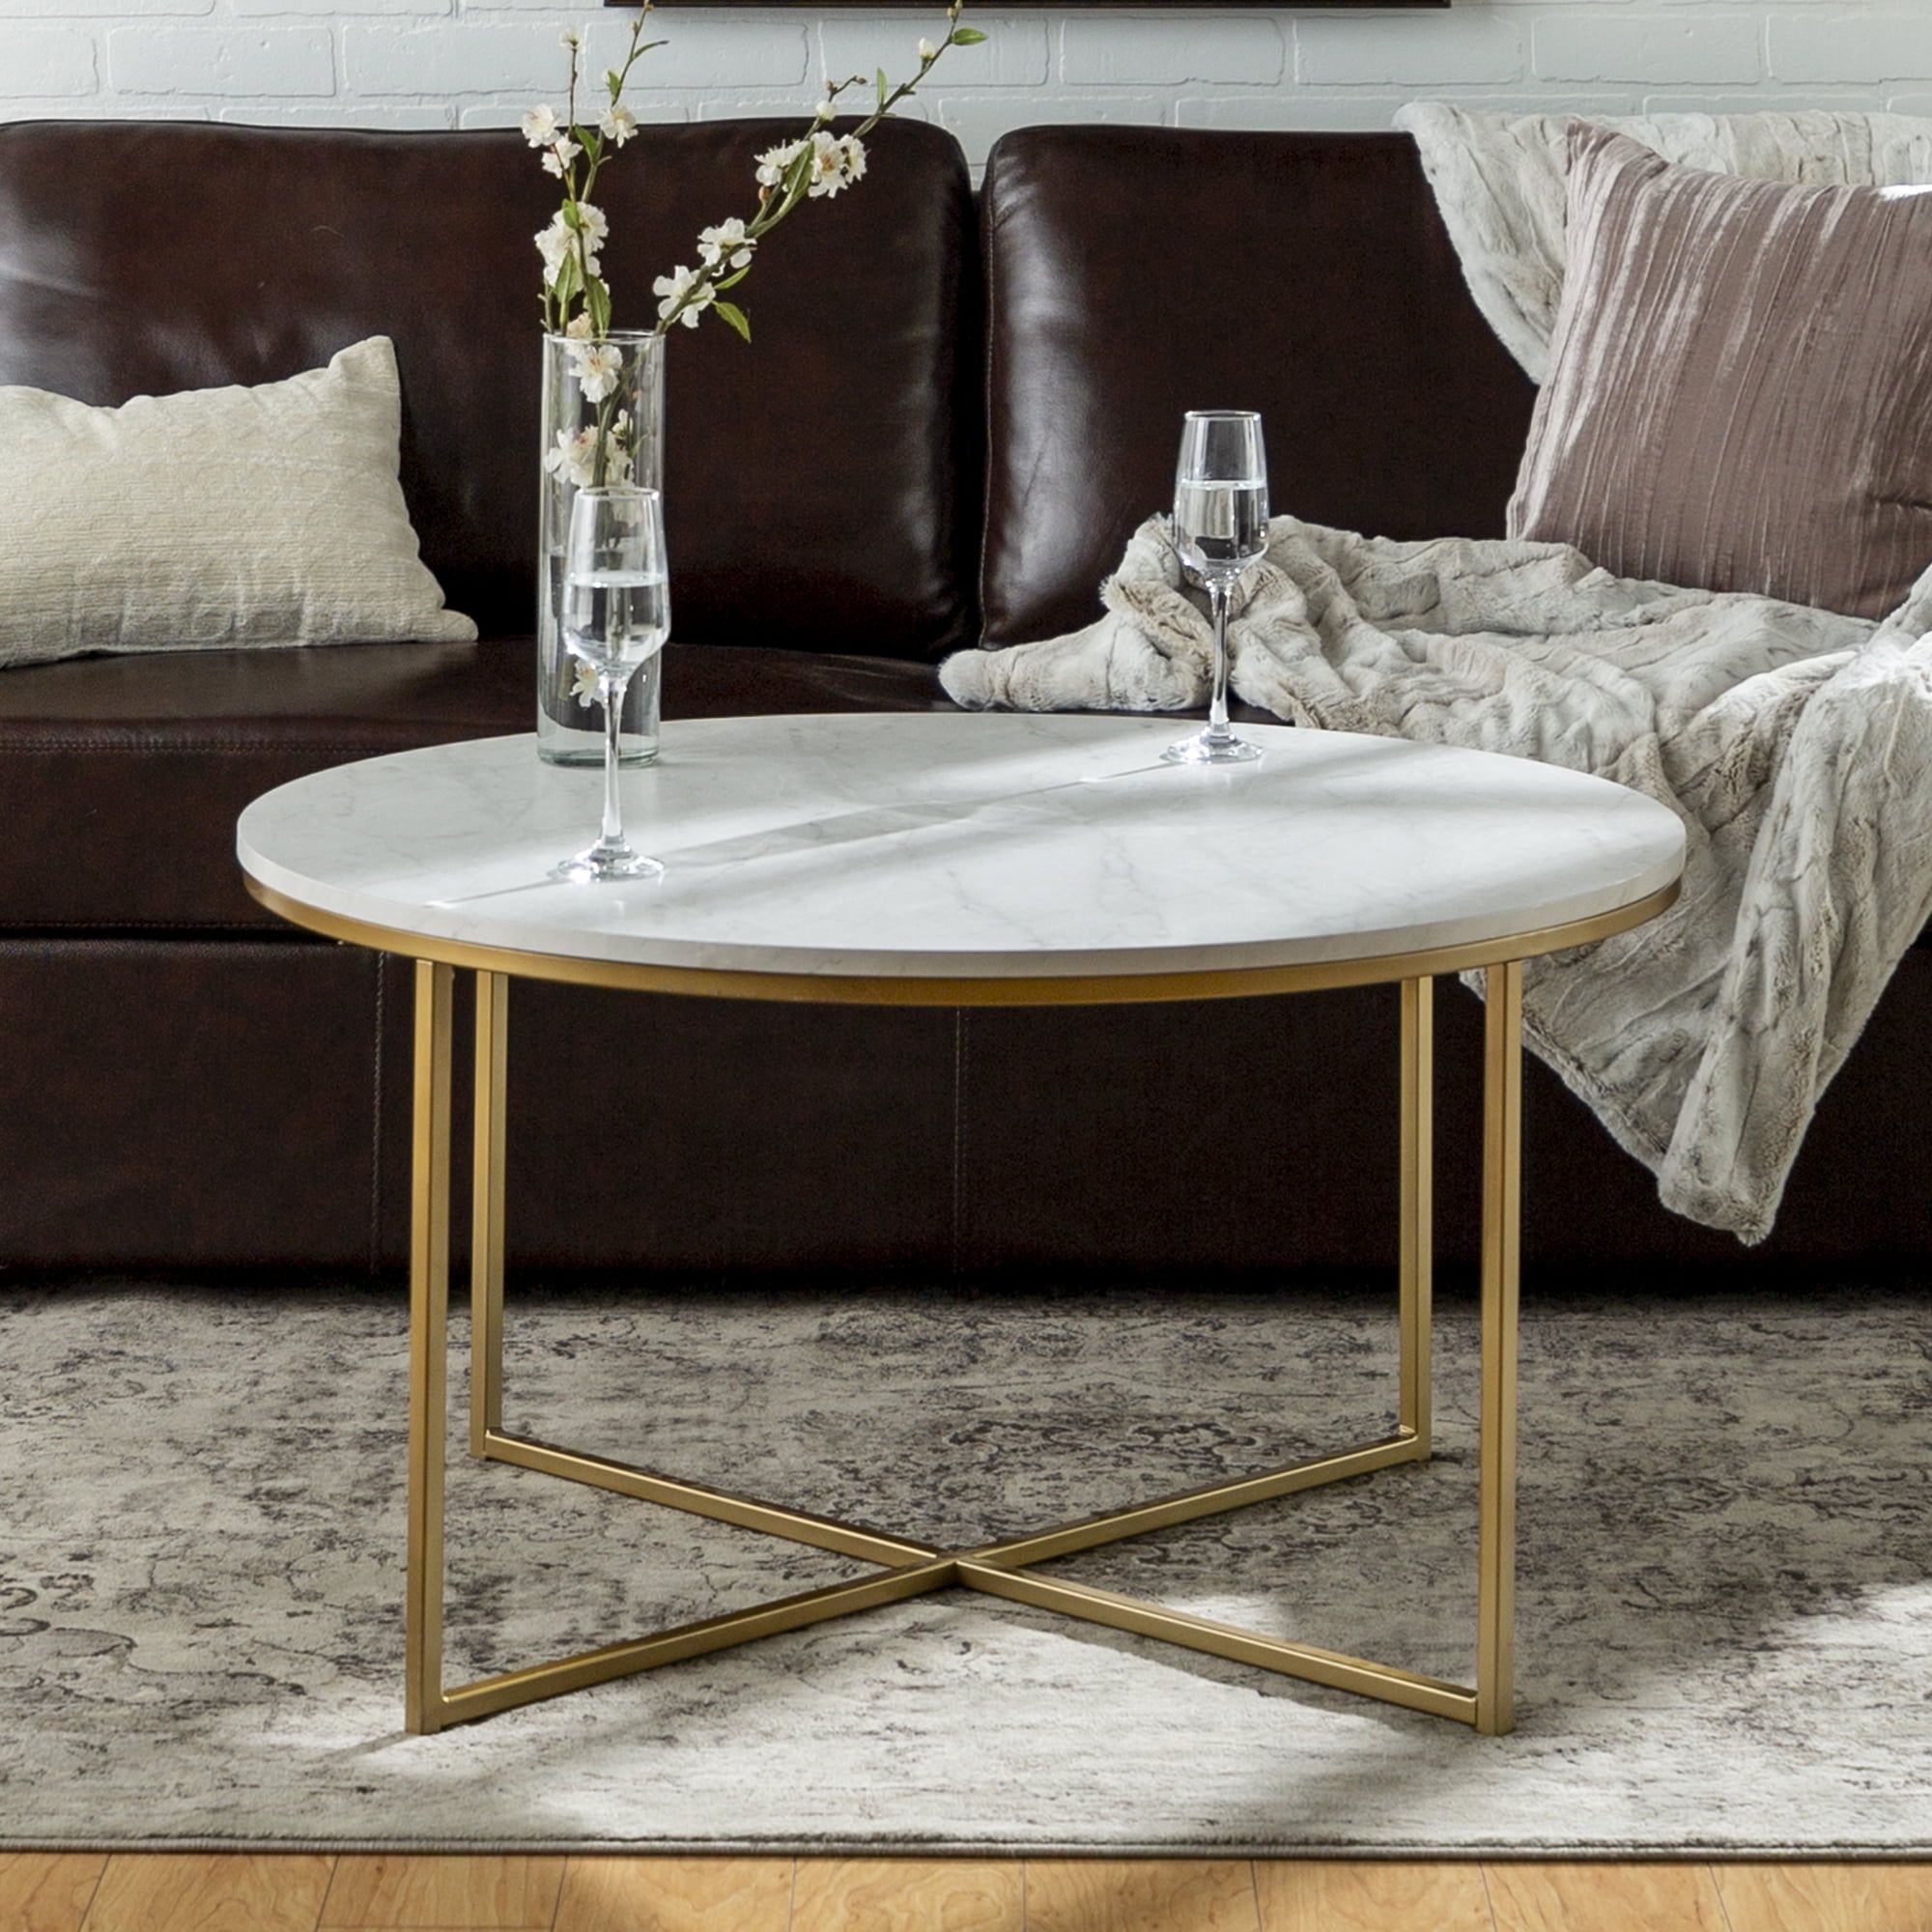 Ember Interiors Modern Round Coffee Table, Faux White Marble/gold In Modern Round Faux Marble Coffee Tables (View 2 of 15)